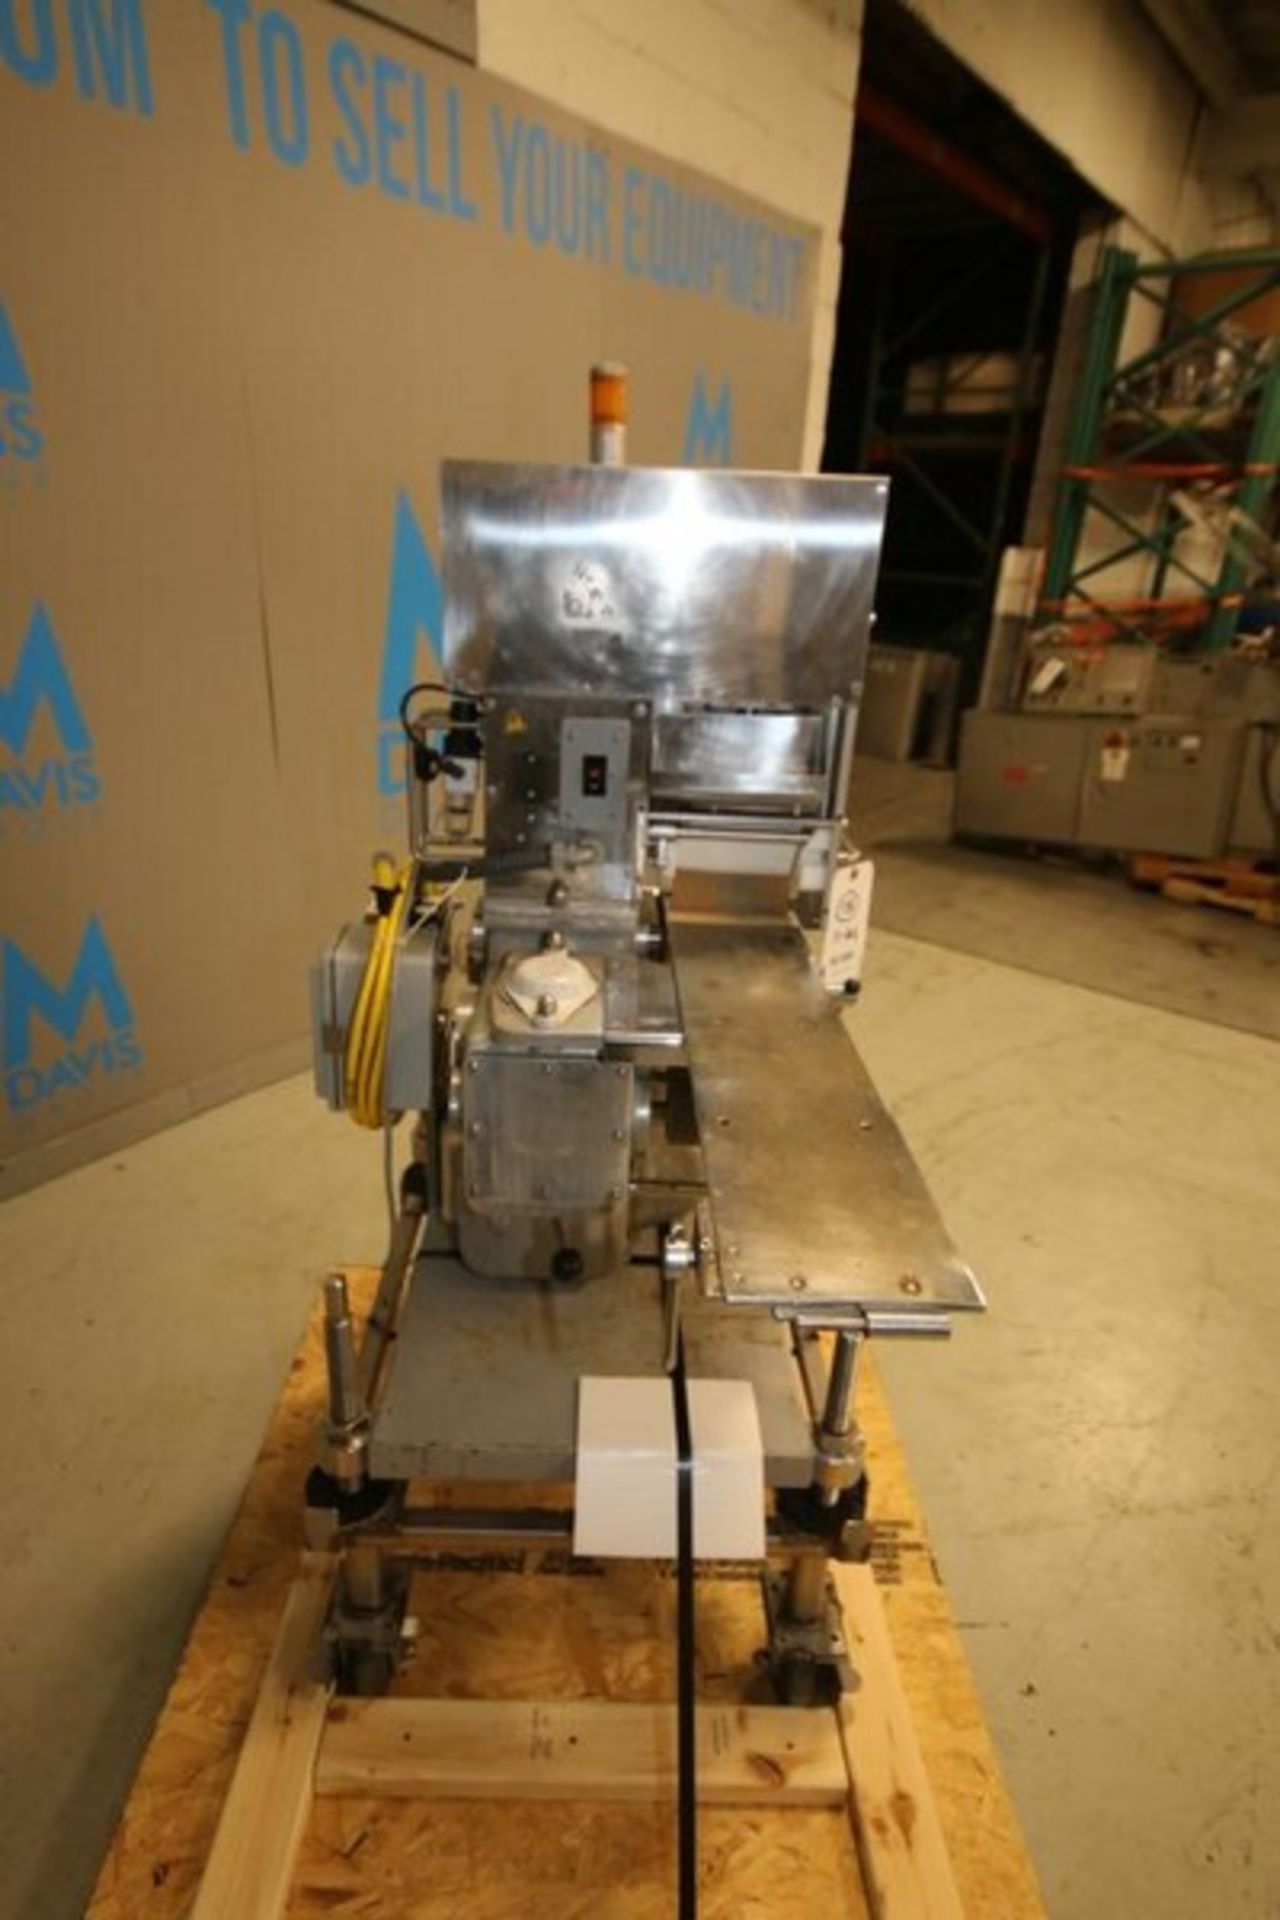 Rheon S/S Guillotine Style Vertical Cross Cutter, Model GK420, SN396, with 5.5 " Length Knife, - Image 3 of 8